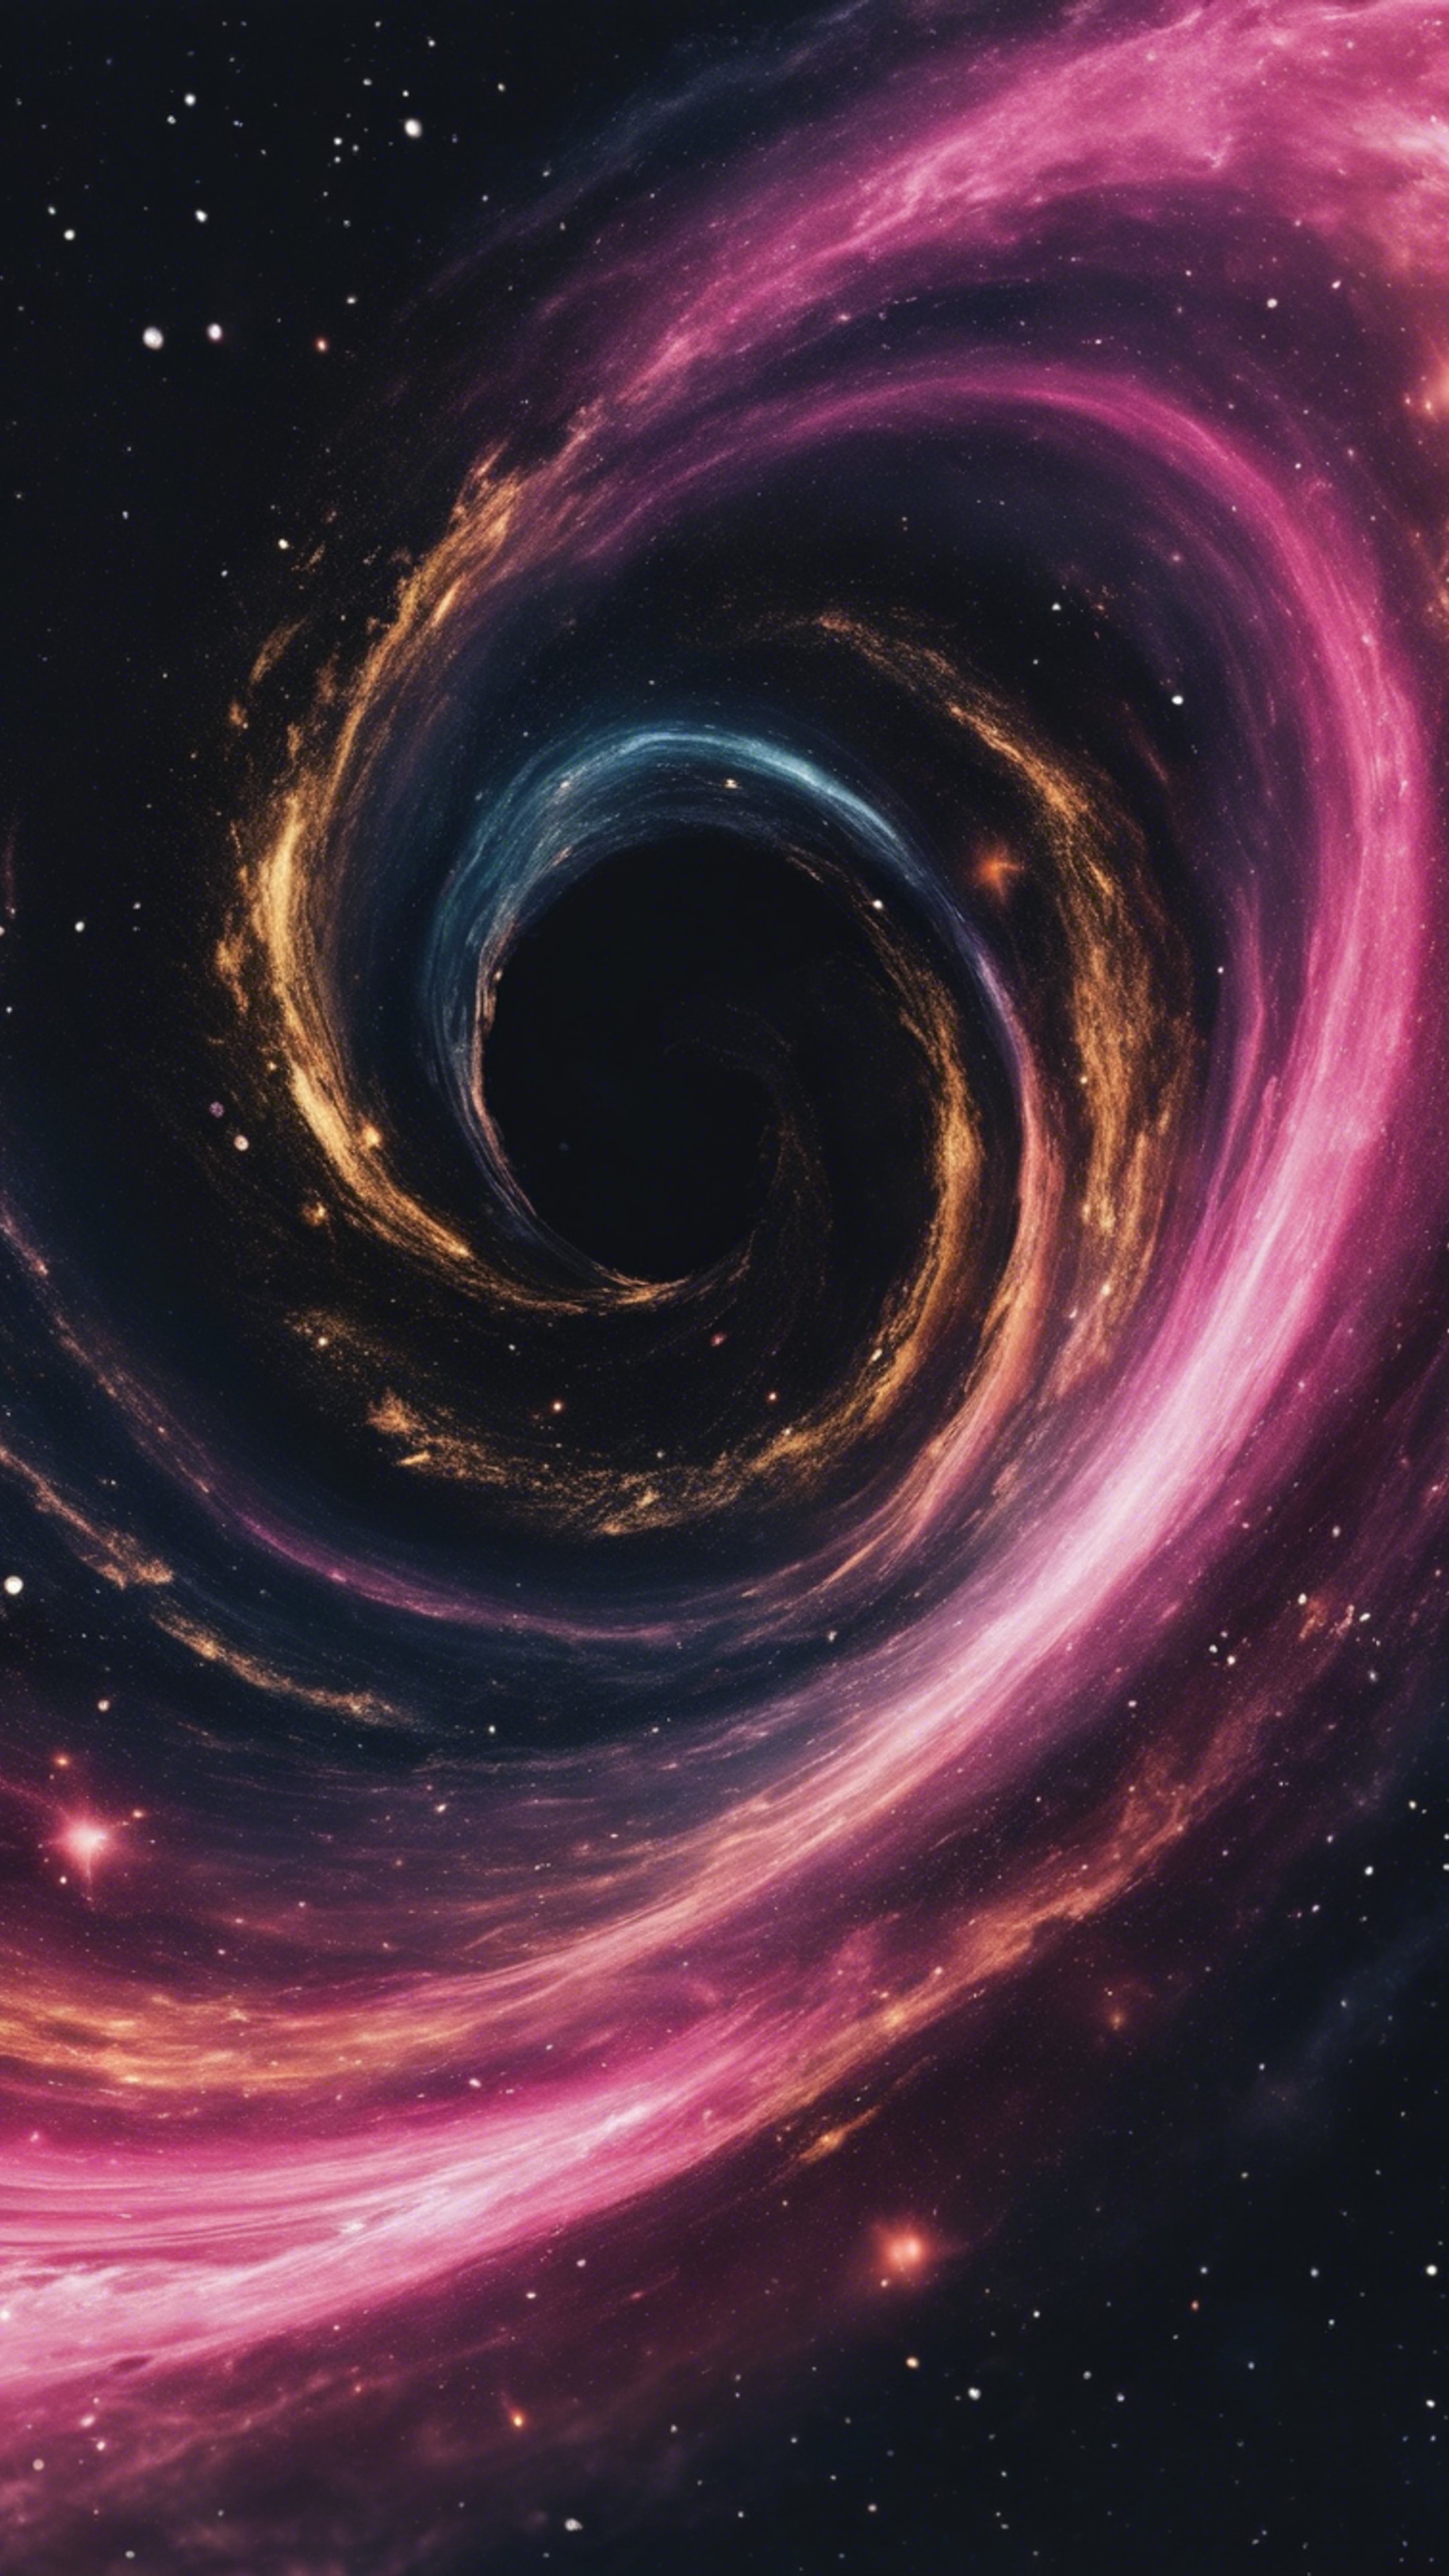 A swirling Galaxy with hues of pink and gold amongst the dark void of space. Обои[38386911806f452c9333]